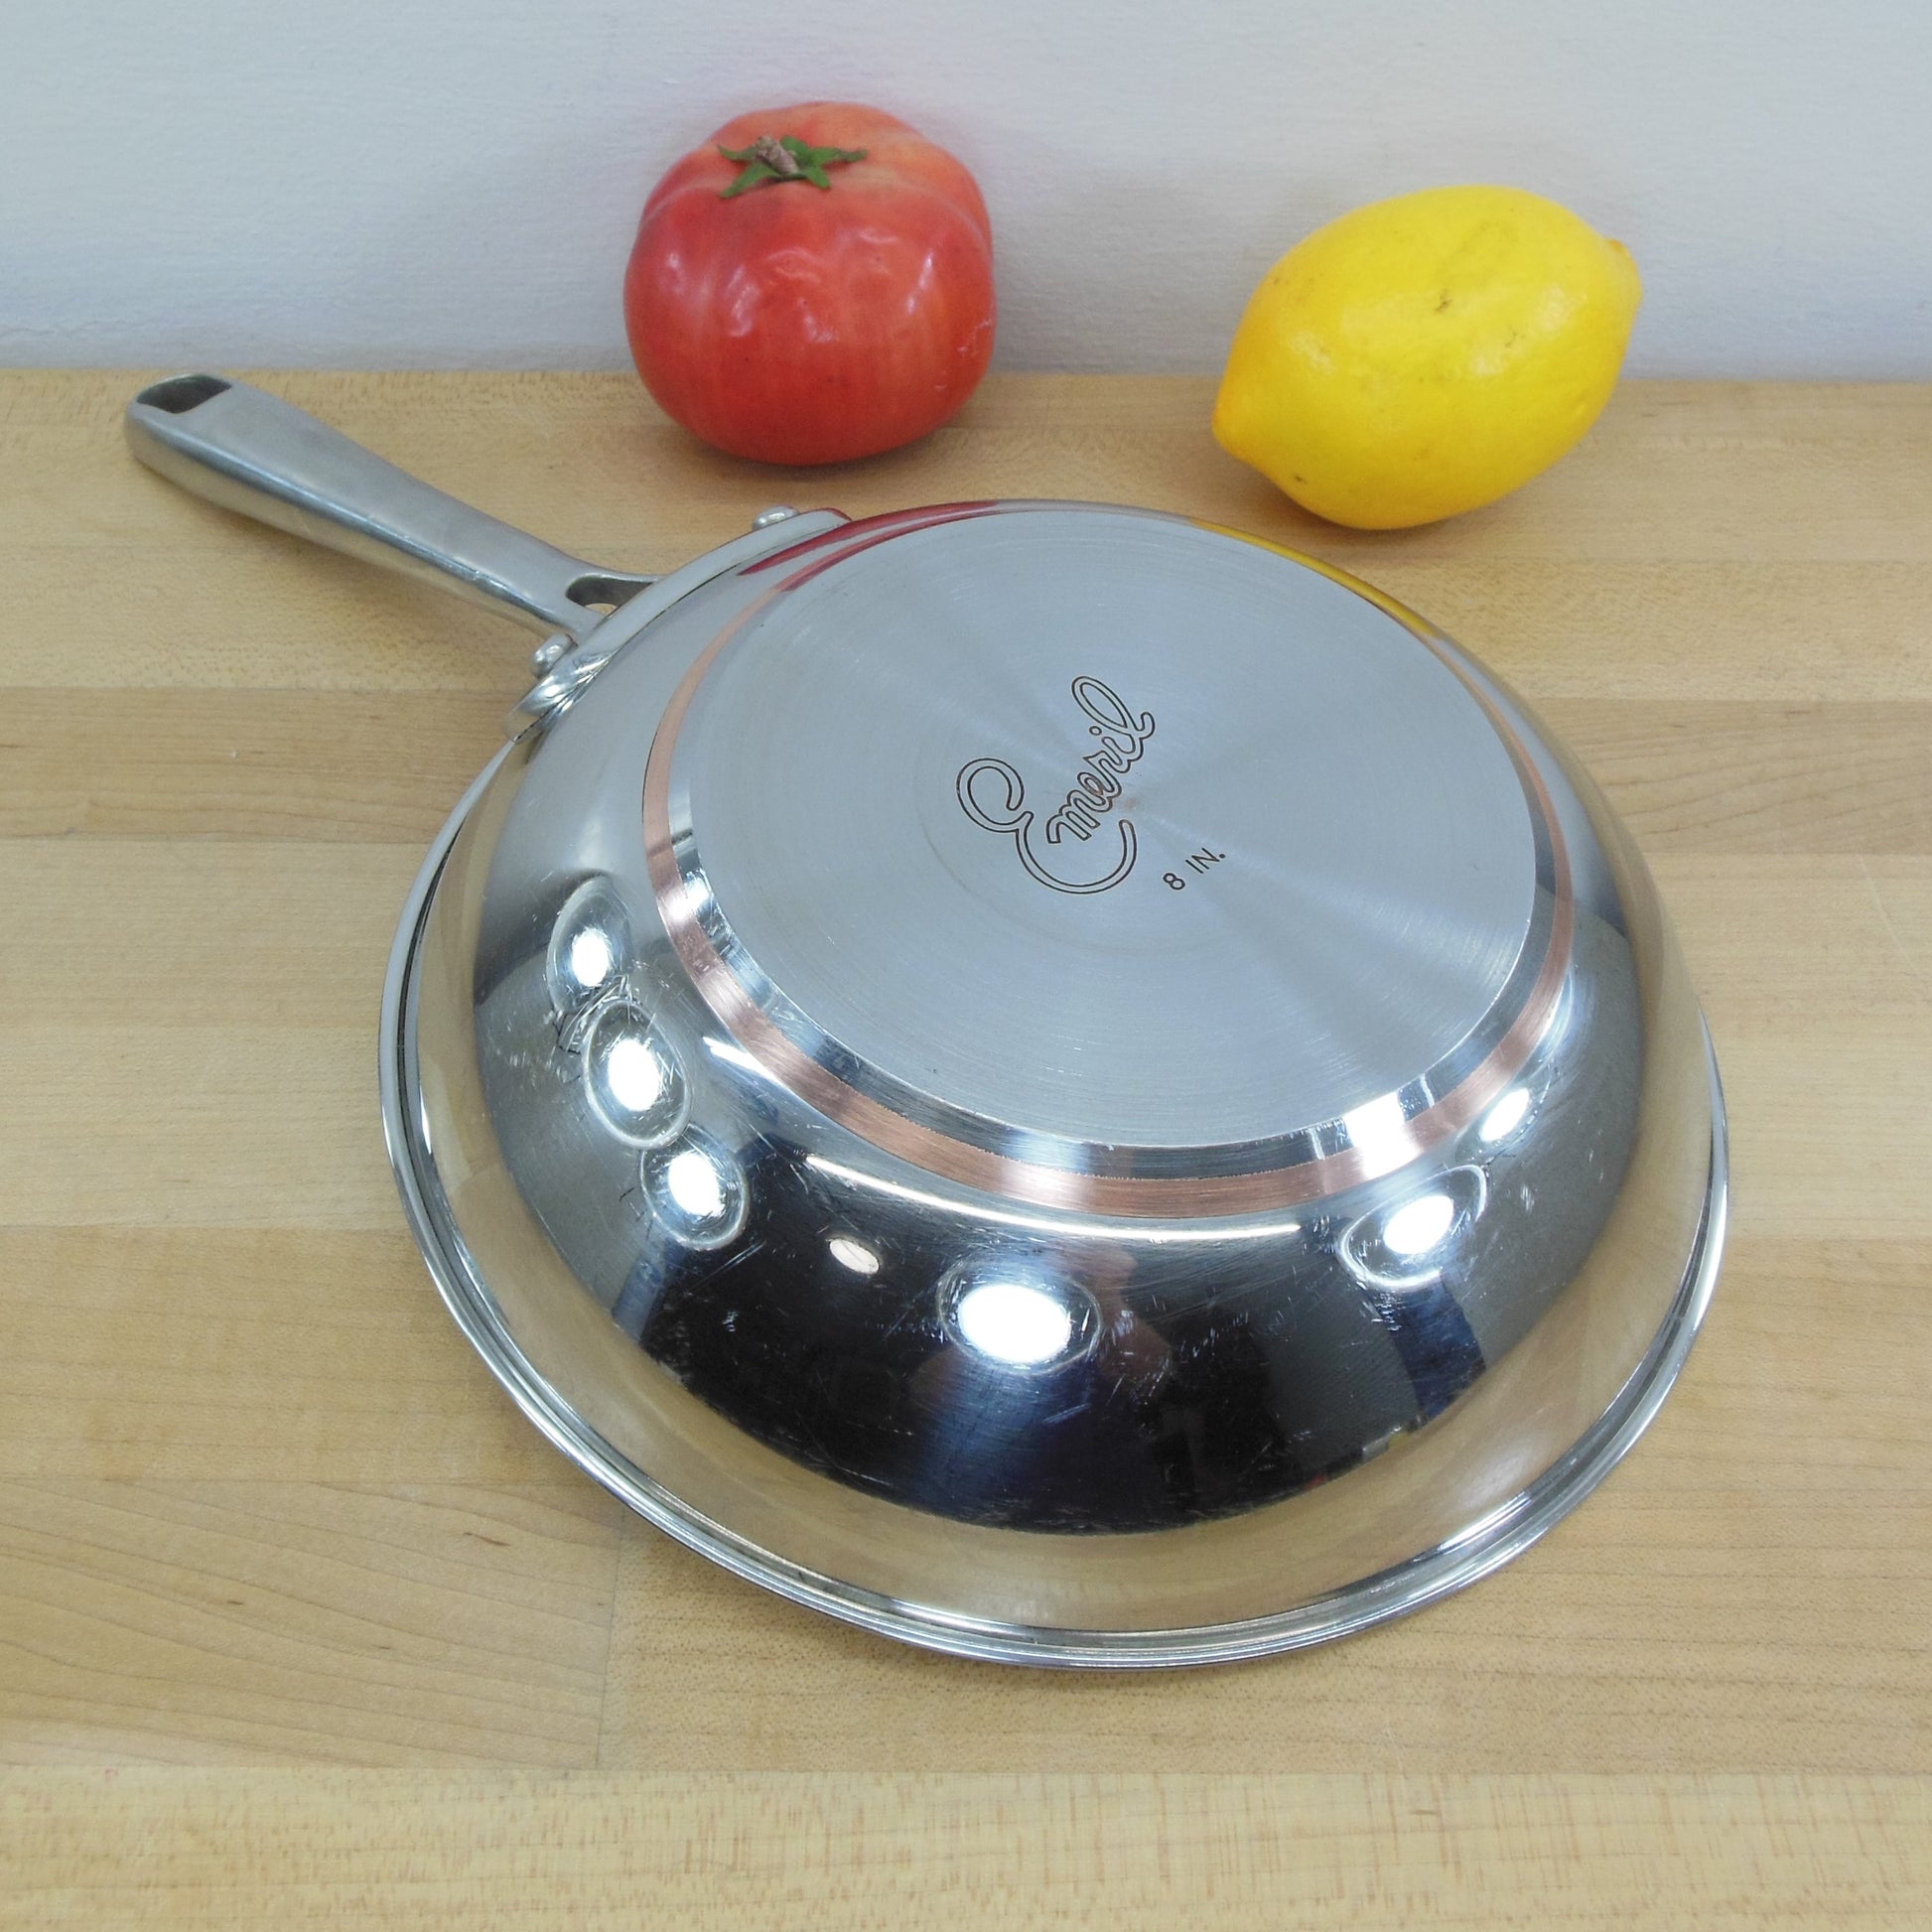 emeril stainless steel cookware lot 8” Skillet 3qt Sauce Pan